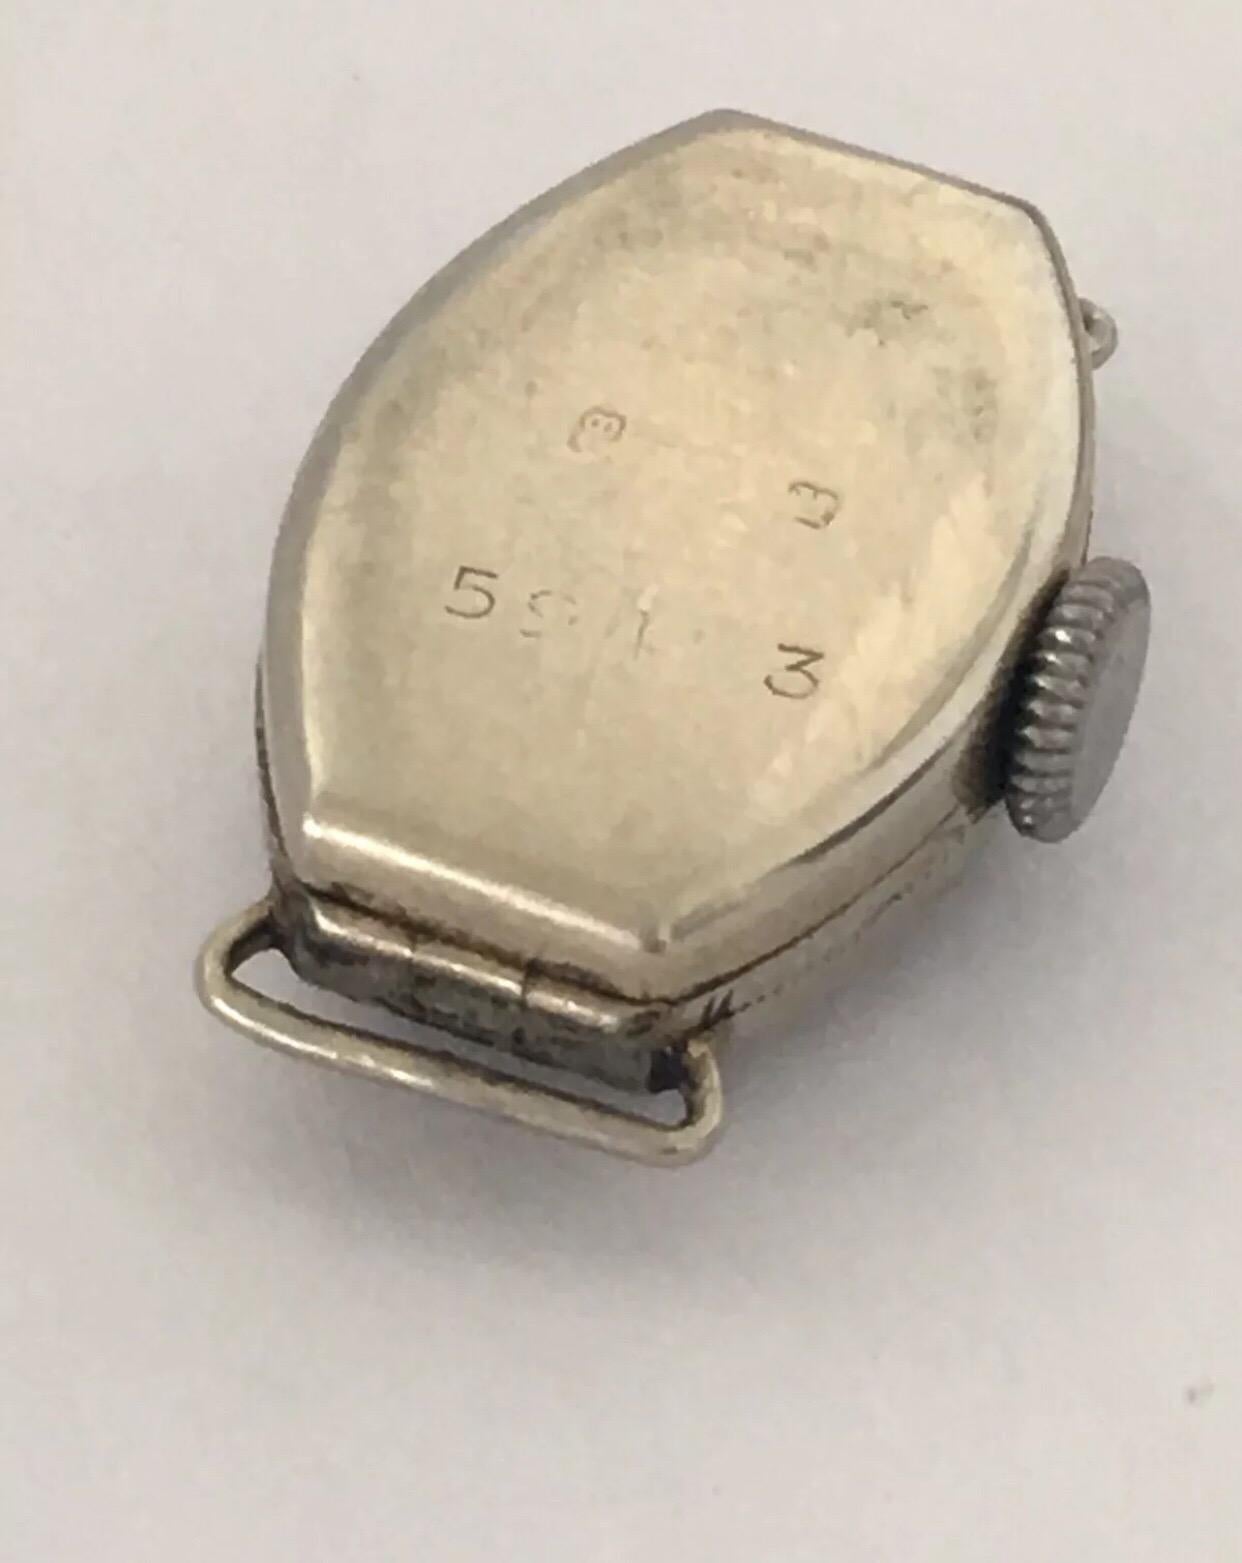 
1920’s Small White Gold Vintage Ladies Wristwatch.


This tiny gold vintage watch is working and ticking well. But I cannot guarantee the time accuracy. It goes a bit faster.